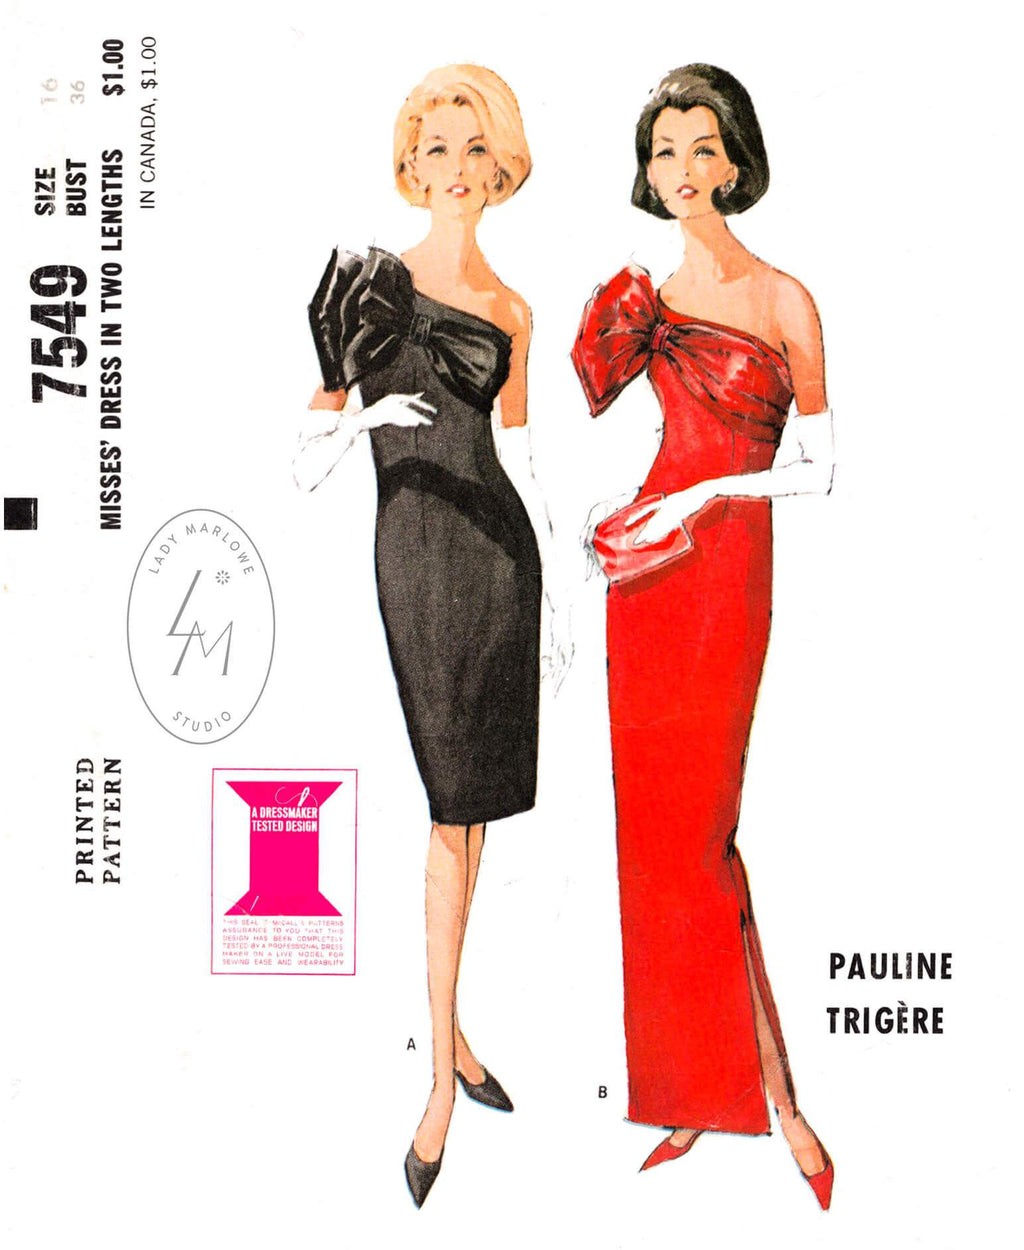 McCall 7549 1960s dress vintage sewing pattern one shoulder bow evening cocktail dress 